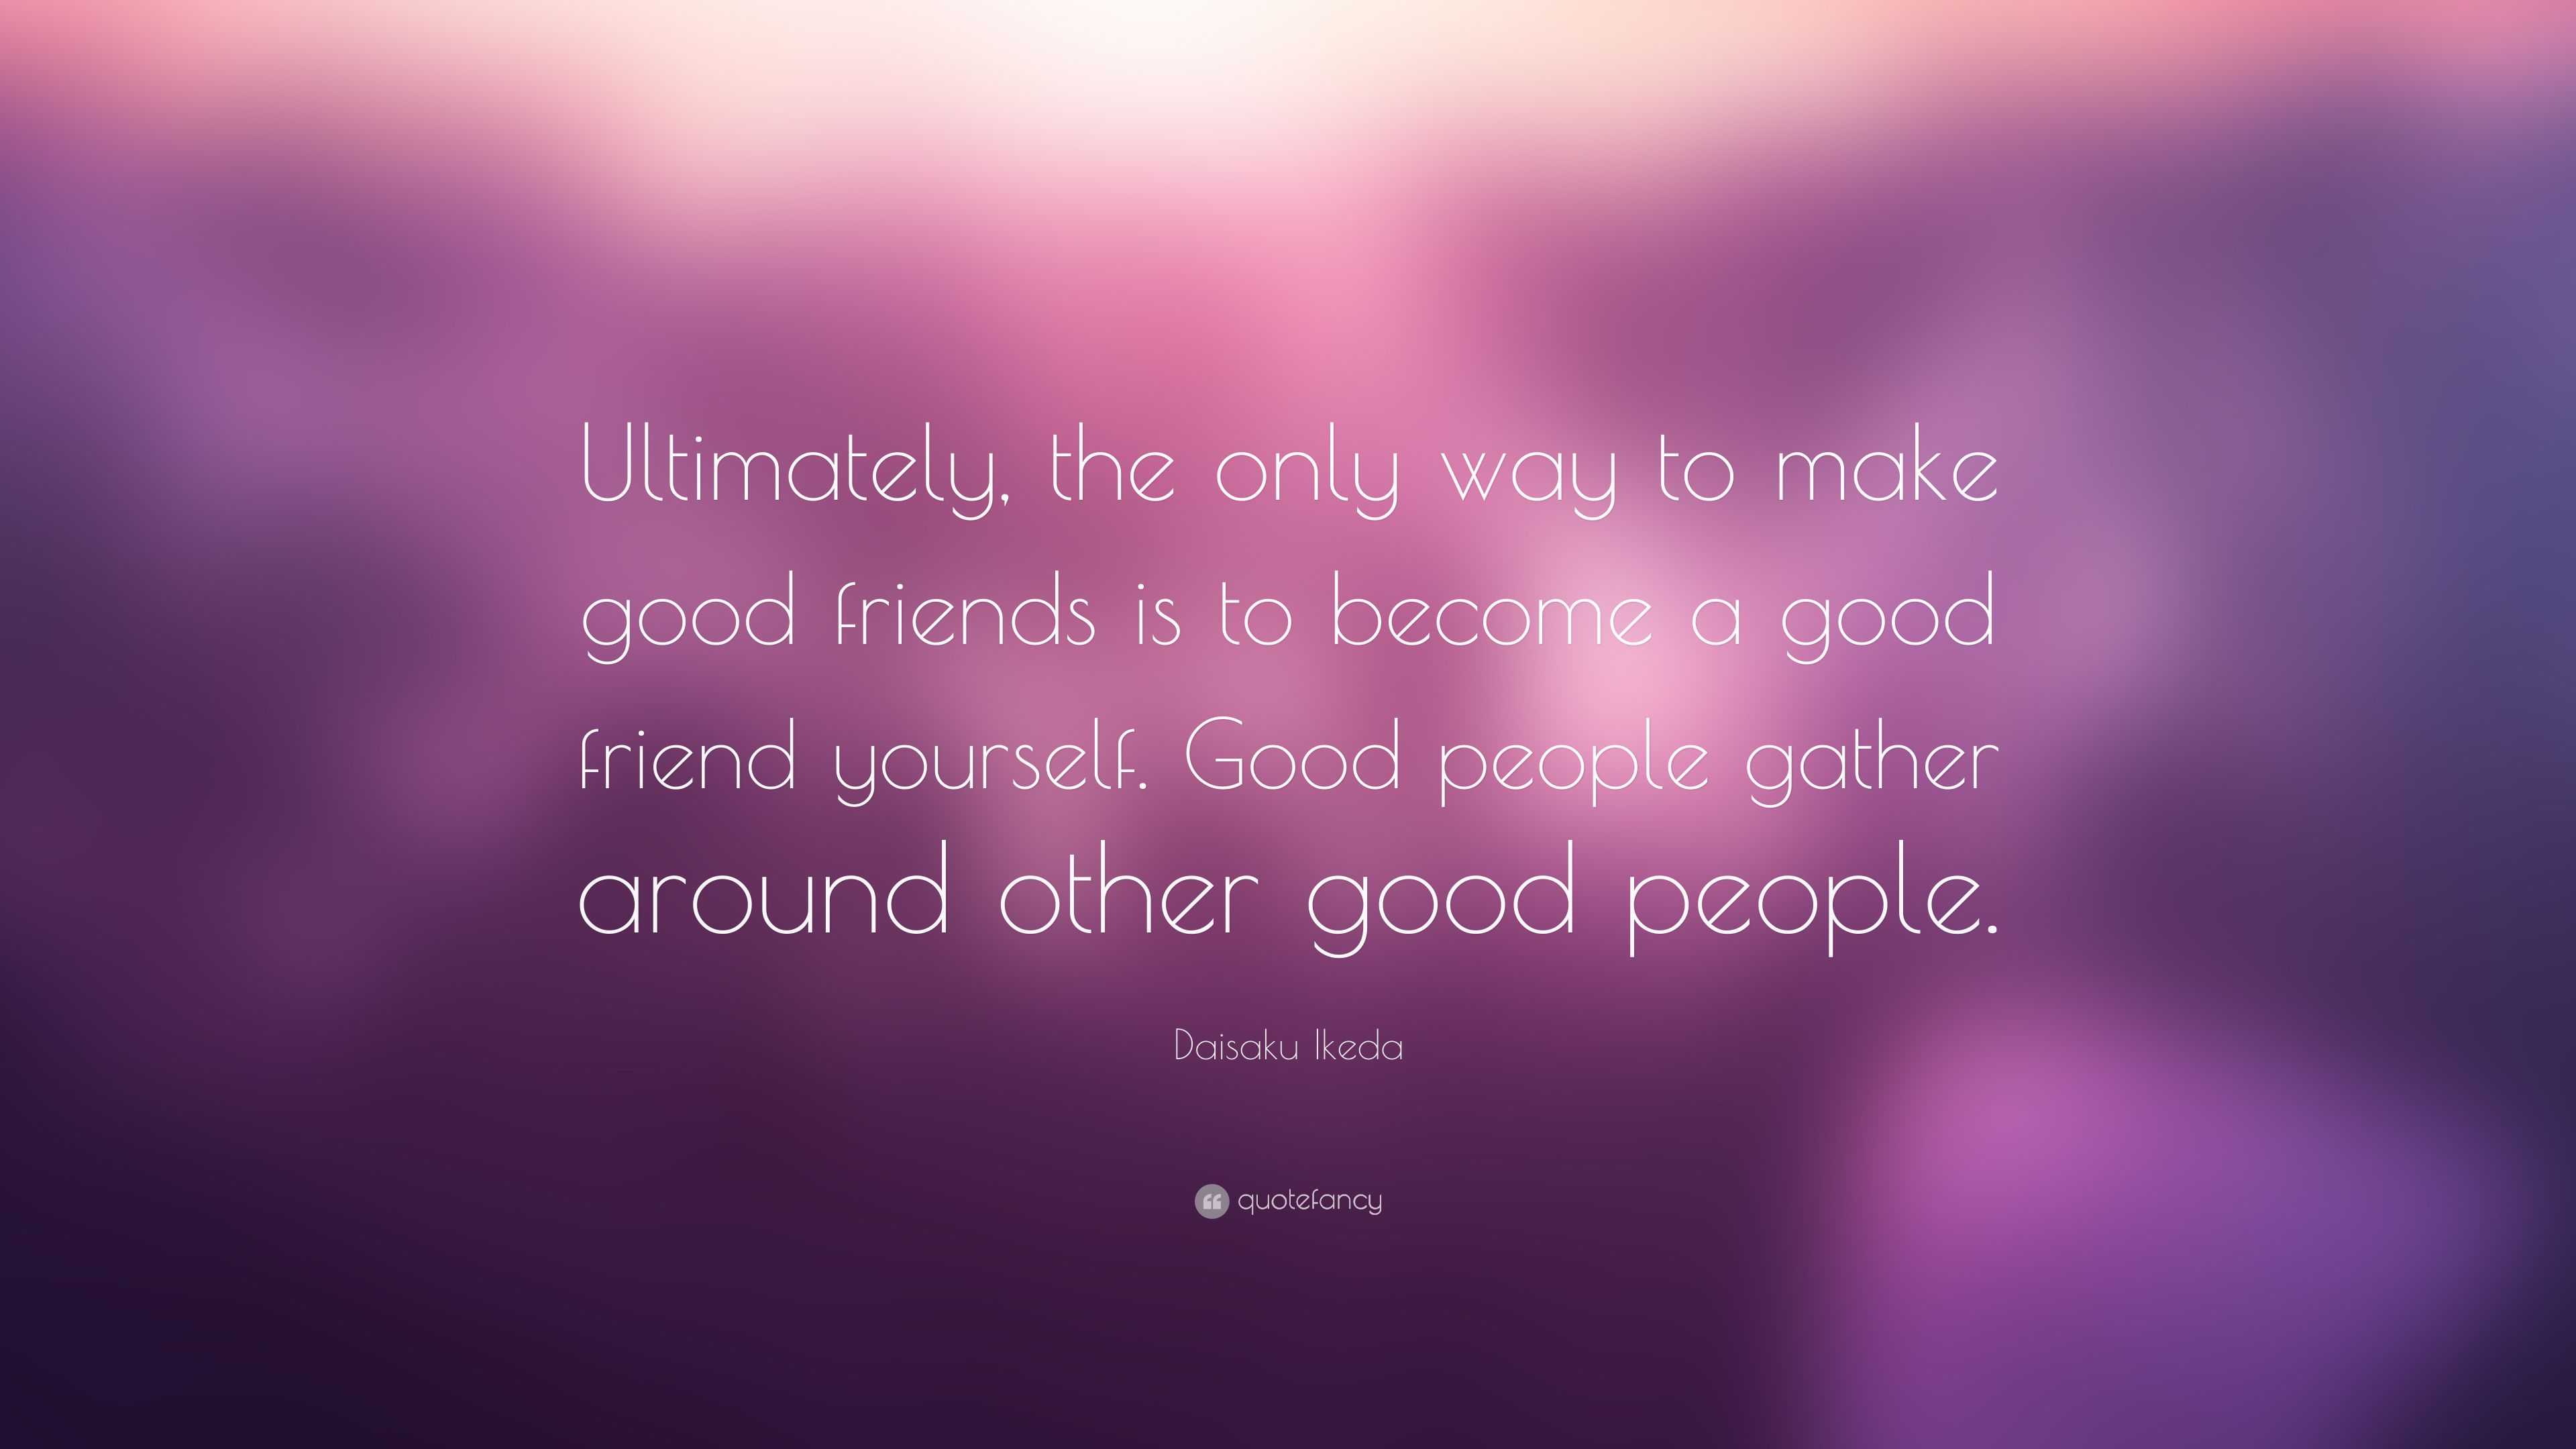 Daisaku Ikeda Quote: “Ultimately, the only way to make good friends is ...